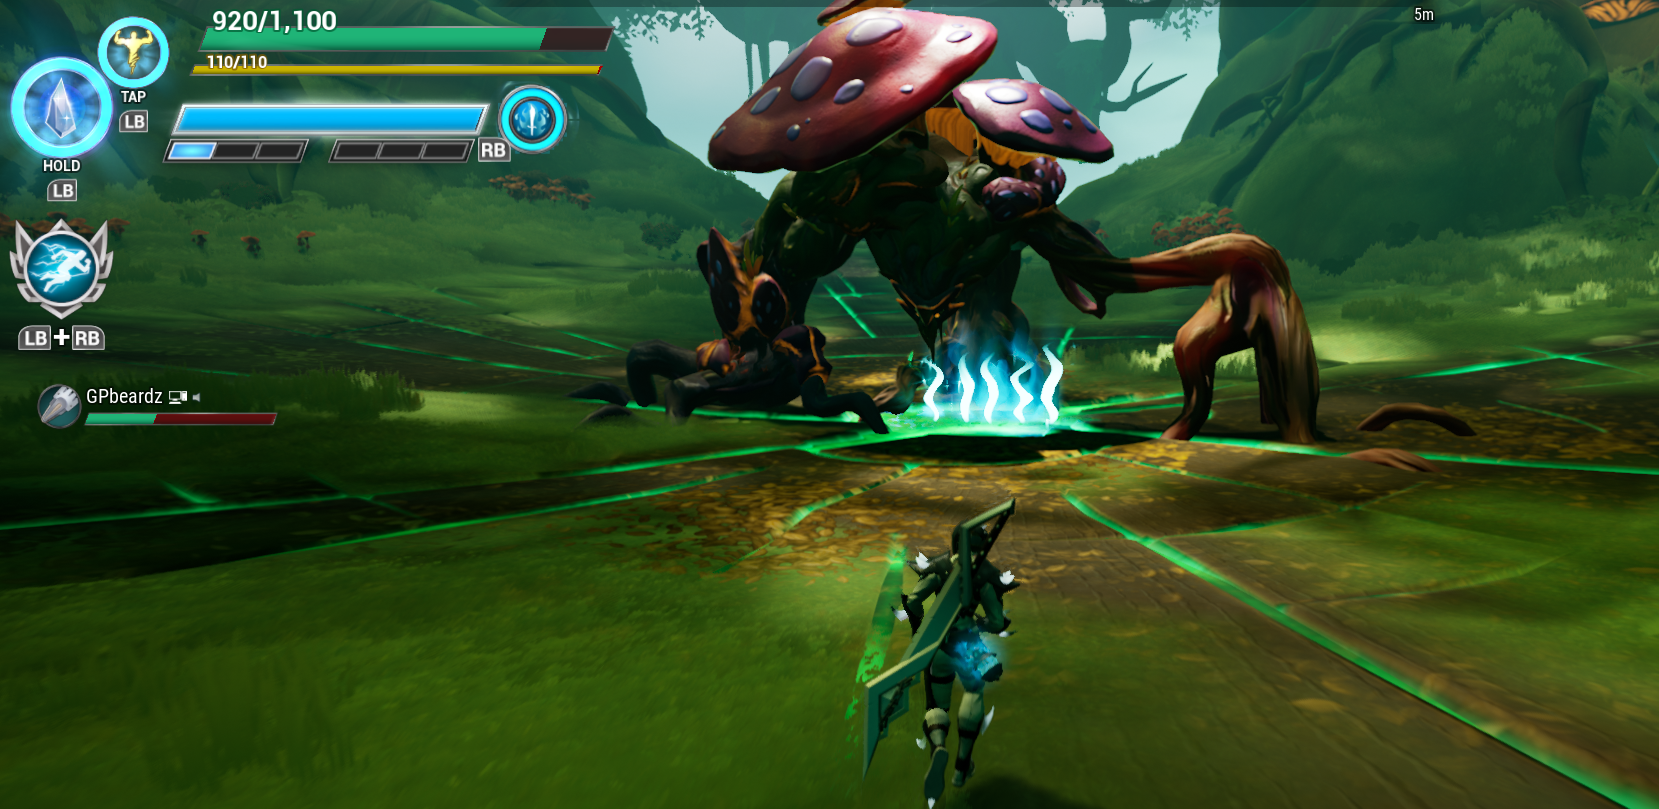 First Hands-on Dauntless' new Mission hunts and Terra Escalation | Massively